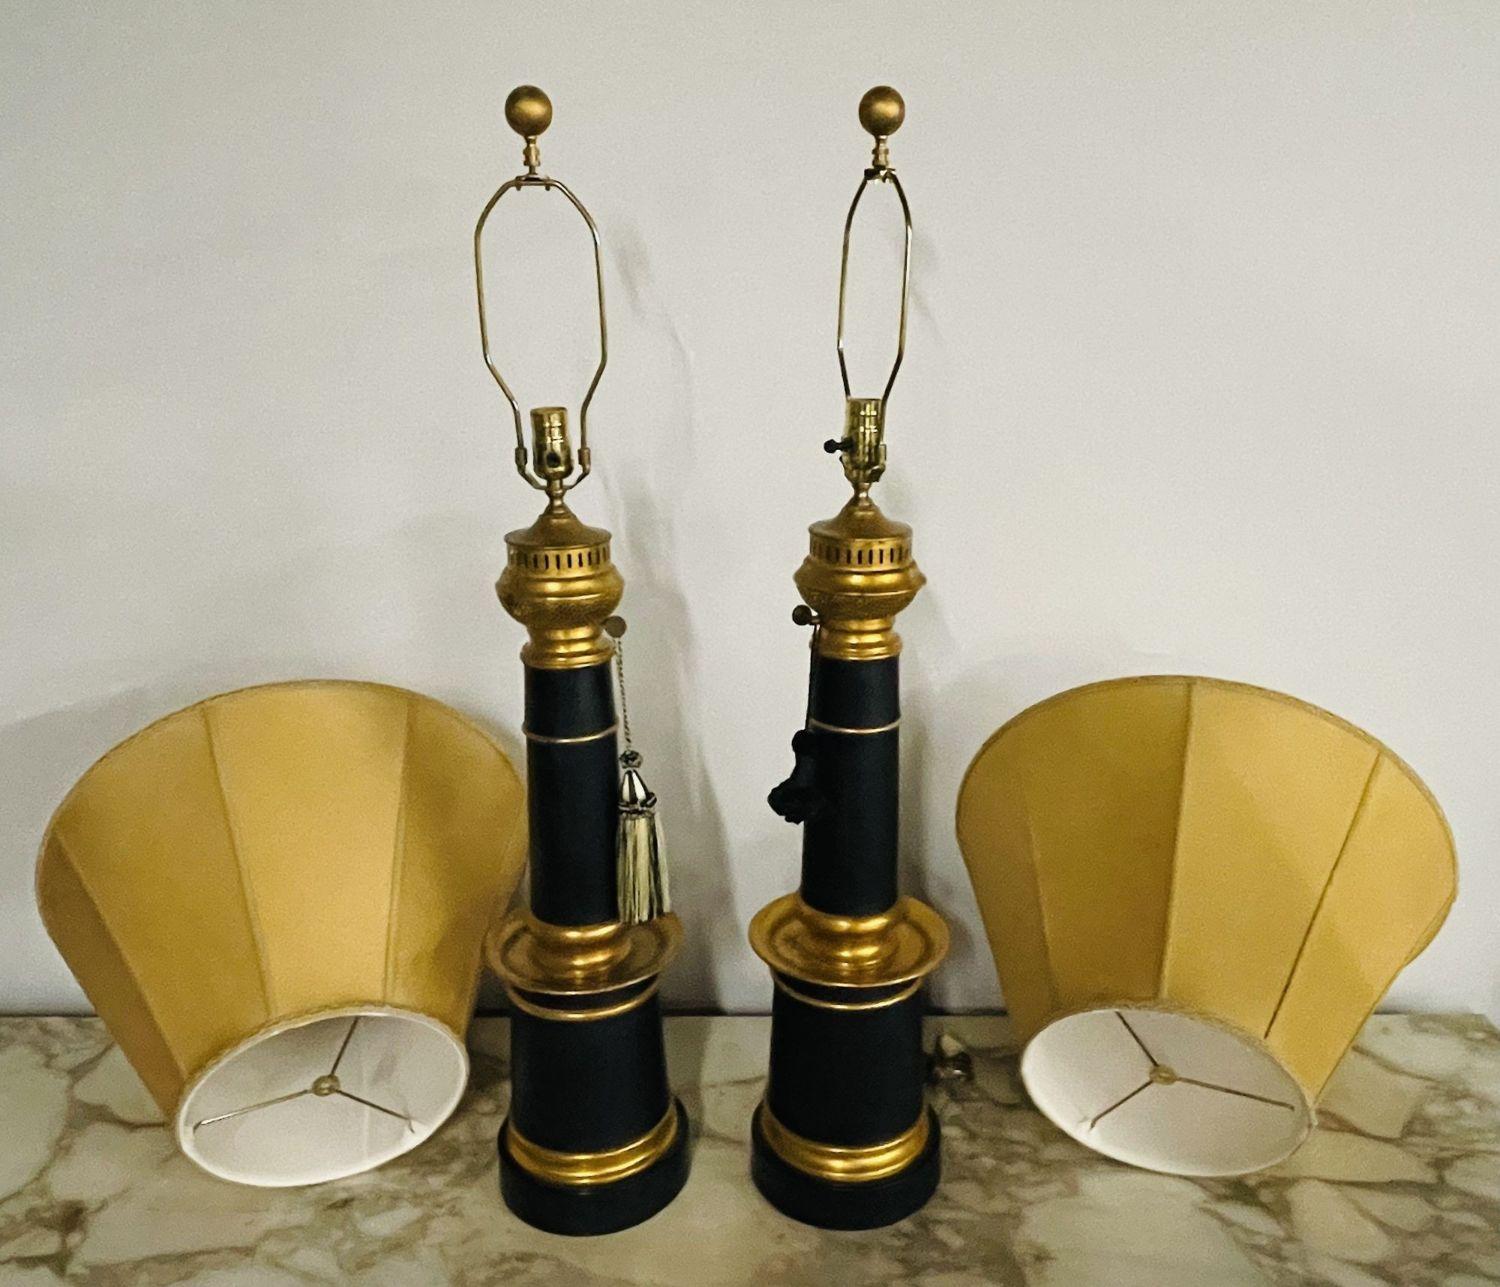 Pair of Hollywood Regency Style Table Lamps with Custom Shades.
 
These stunning Ebony and Gilt metal table lamps are sleek and stylish having the appearance of antique oil lamps. This large and impressive pair have finely detailed custom lamp